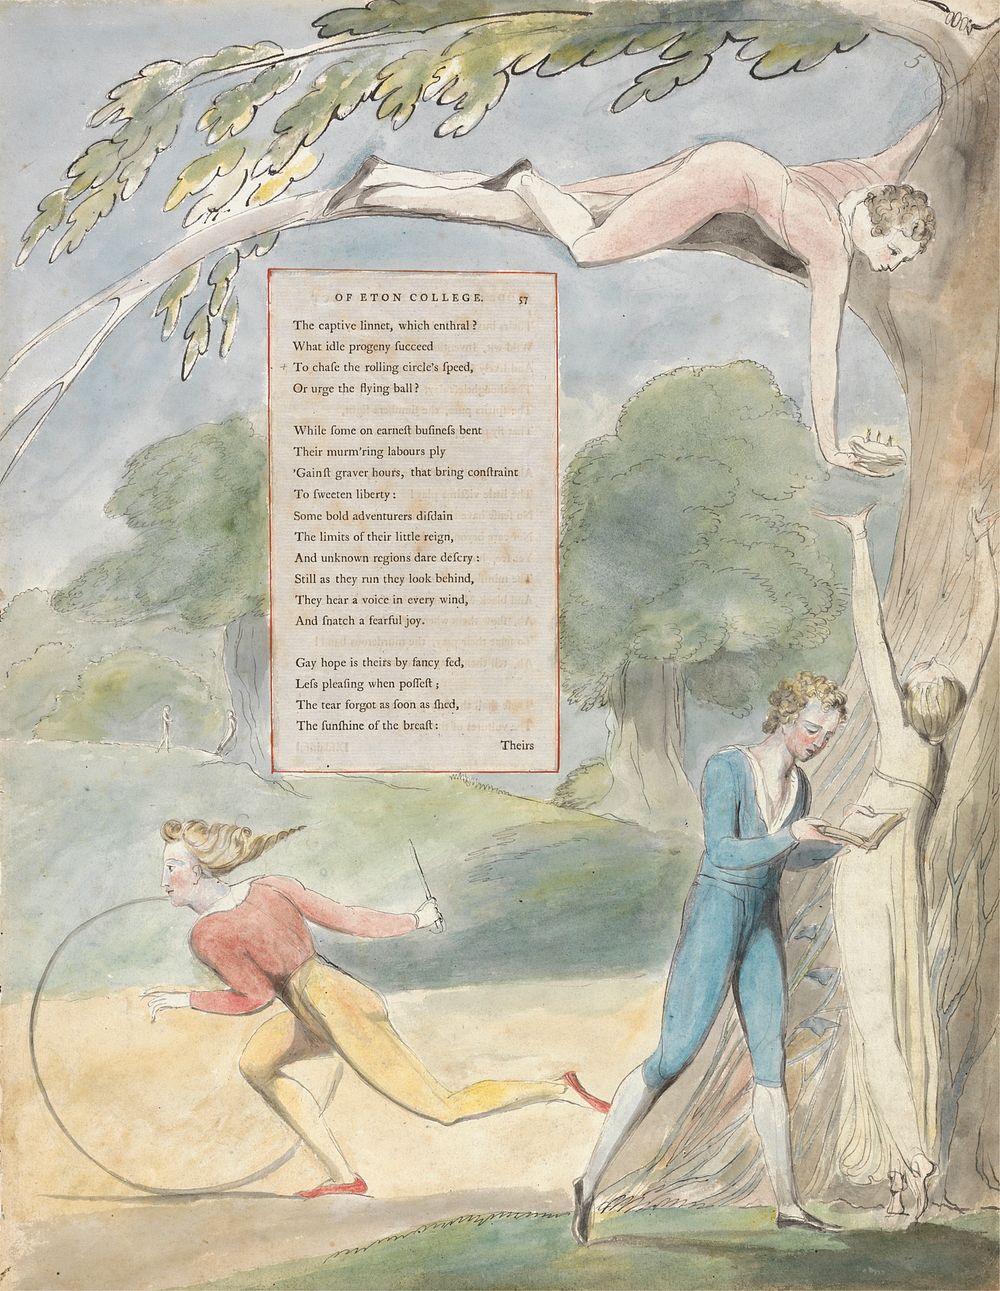 The Poems of Thomas Gray, Design 17, "Ode on a Distant Prospect of Eton College." by William Blake. Original from Yale…